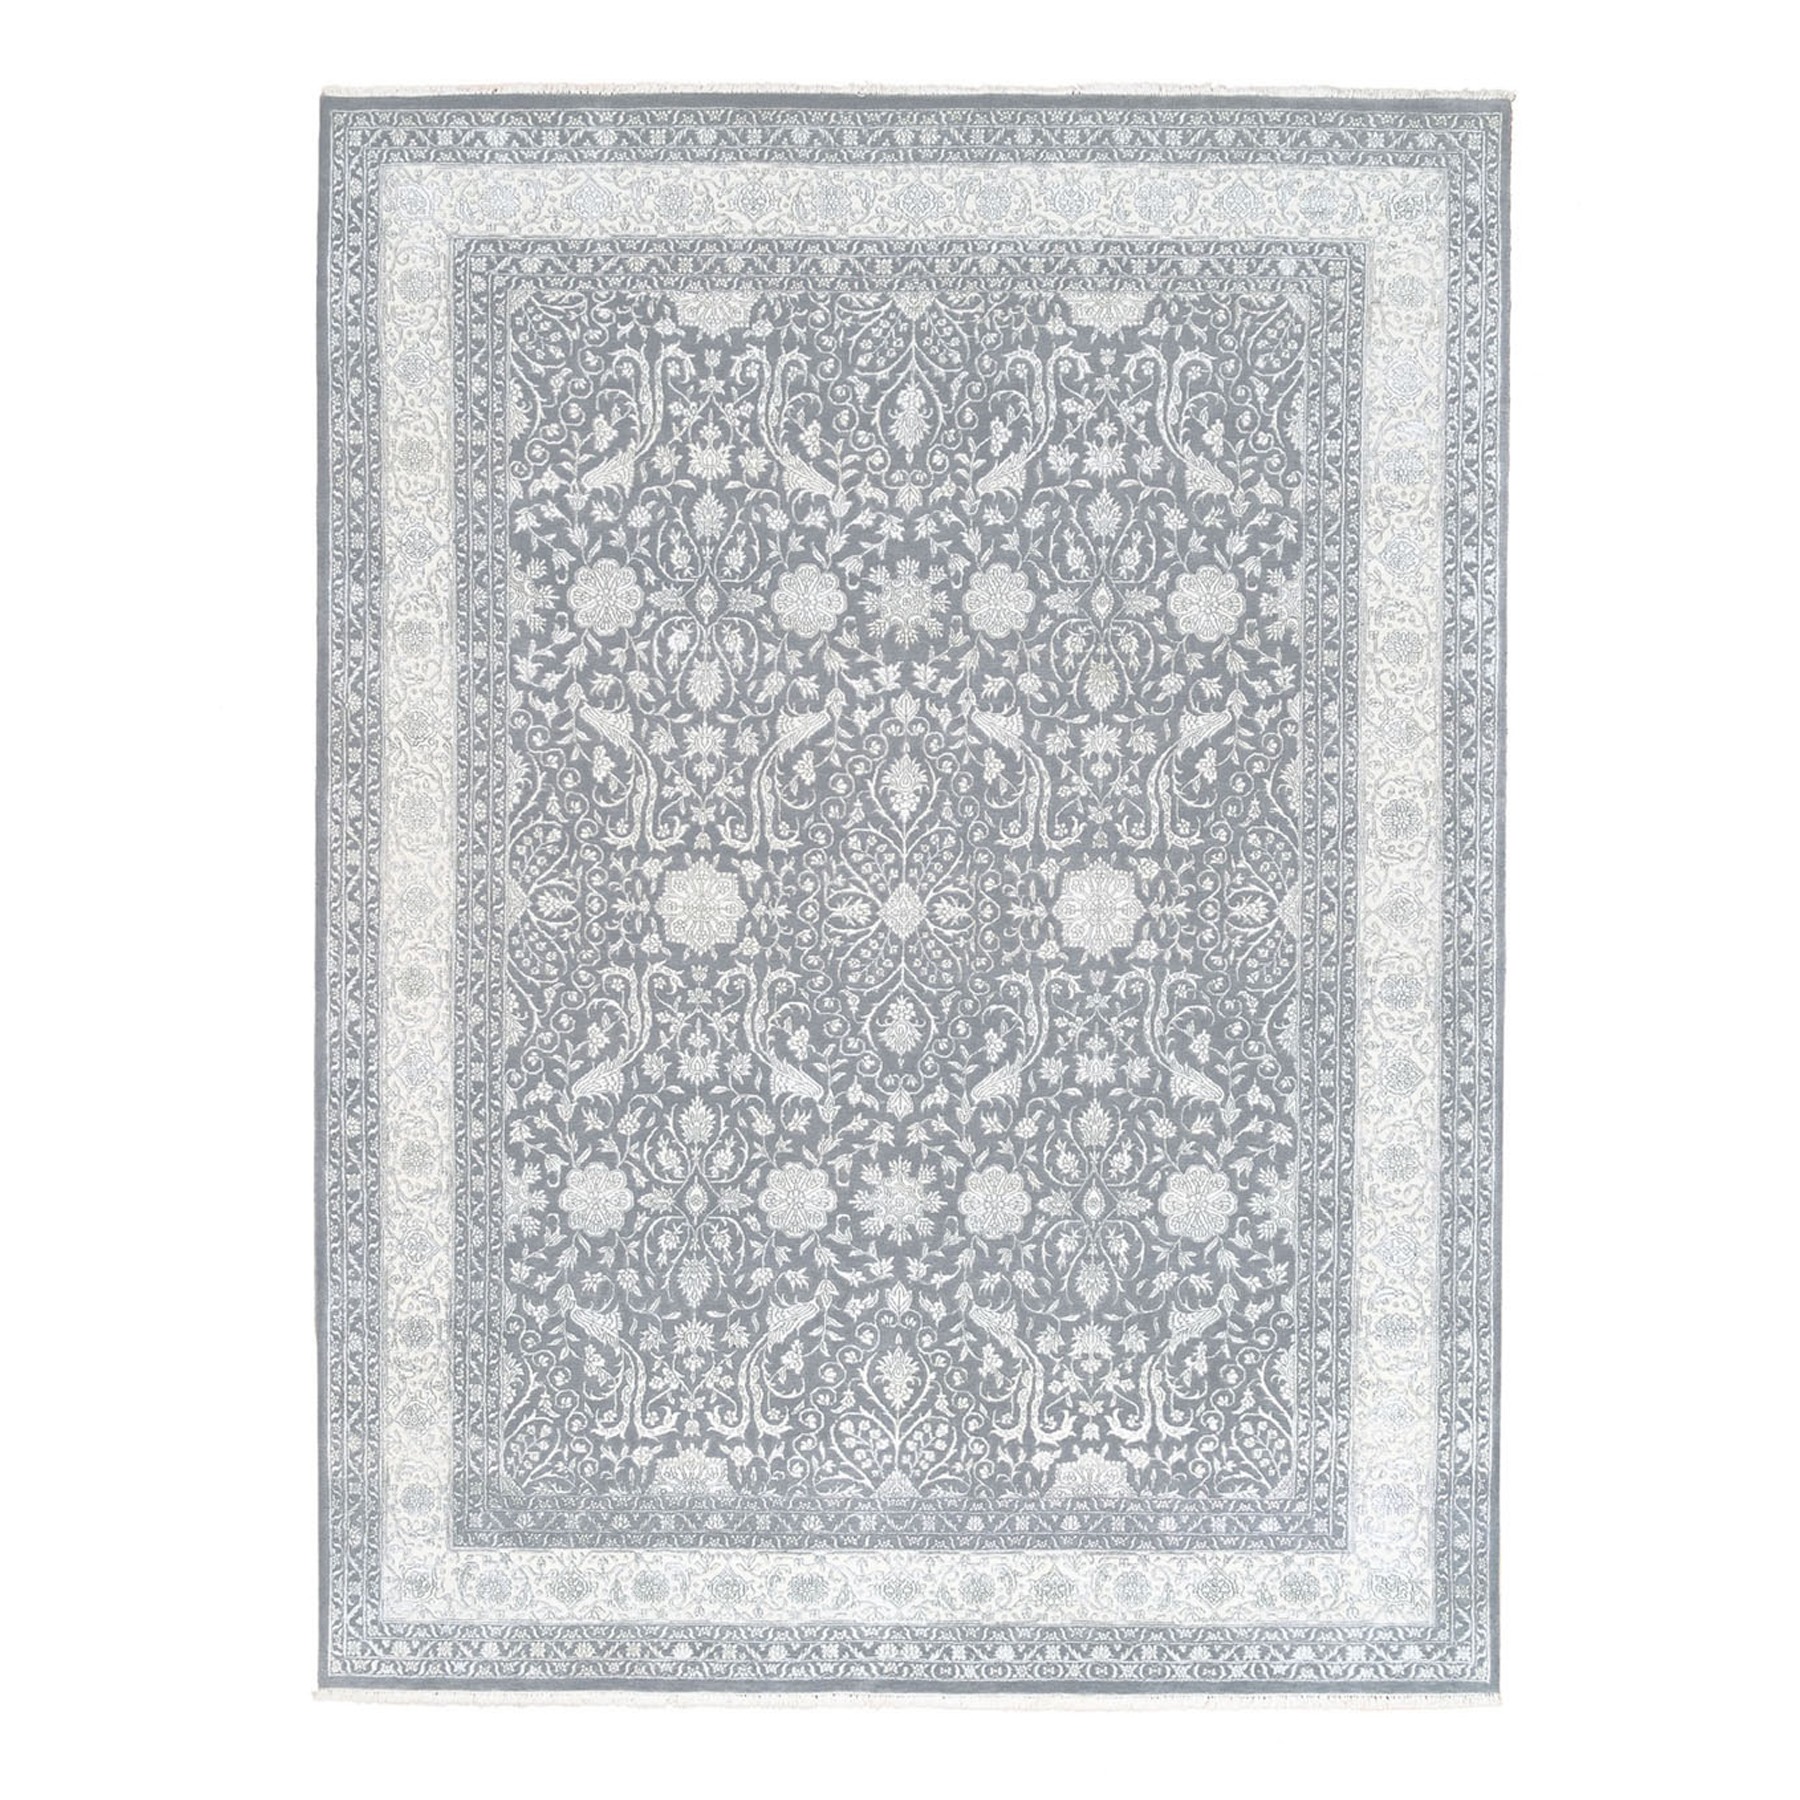 Pirniakan Collection Hand Knotted Grey Rug No: 1124480